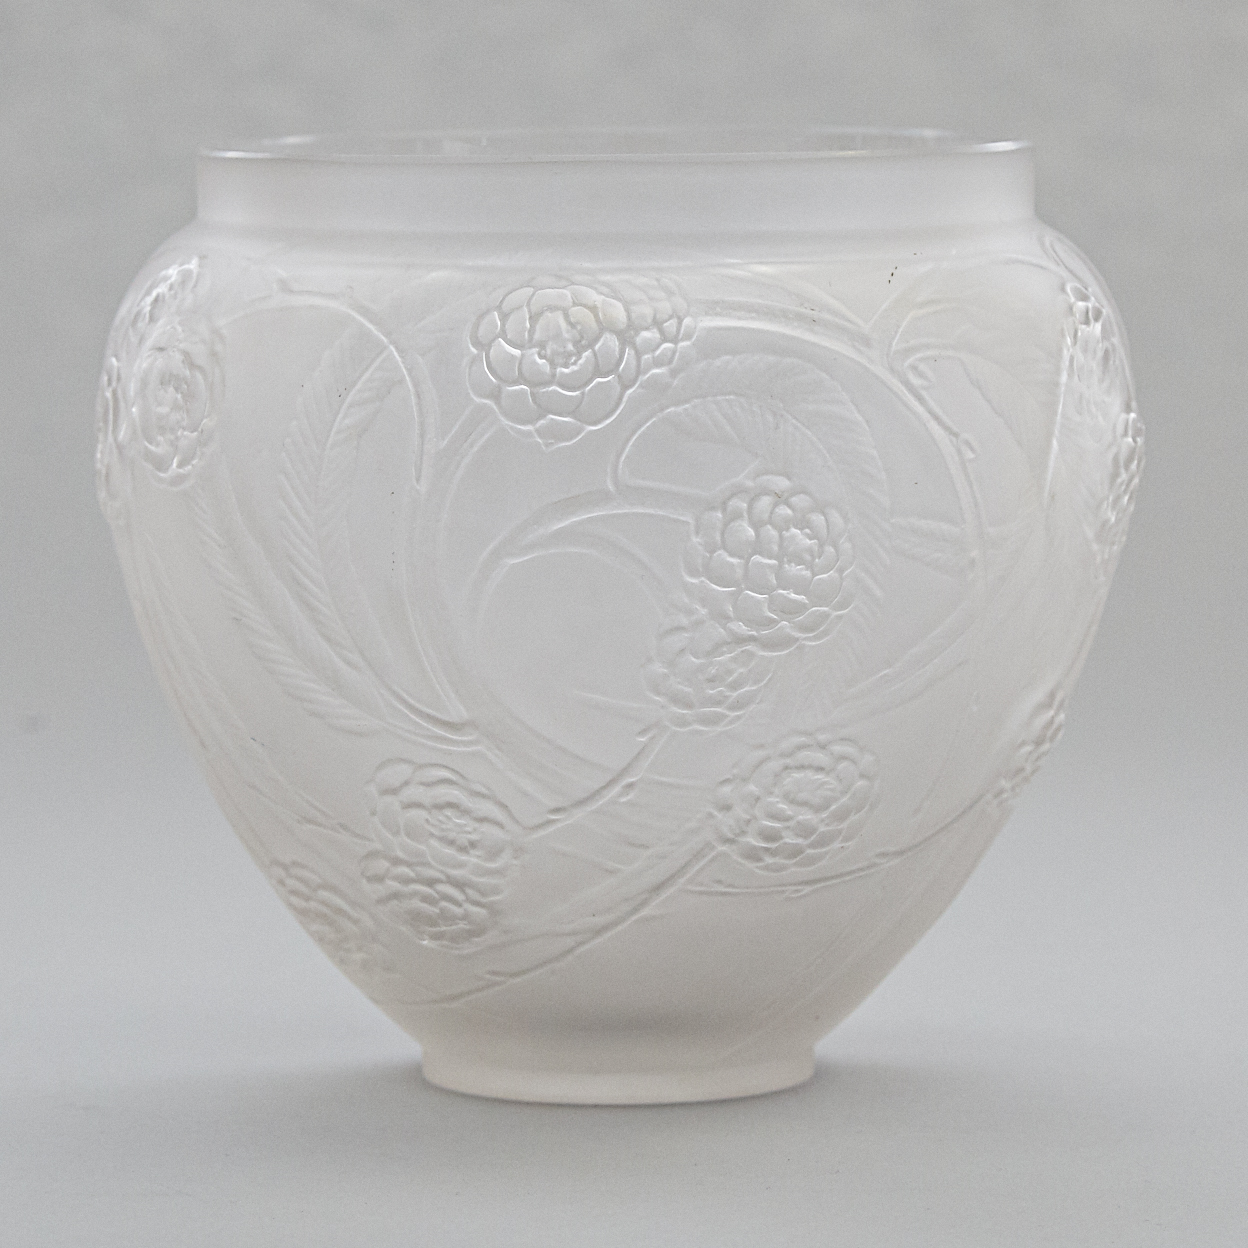 'Néfliers', Lalique Moulded and Frosted Glass Vase, c.1925-30